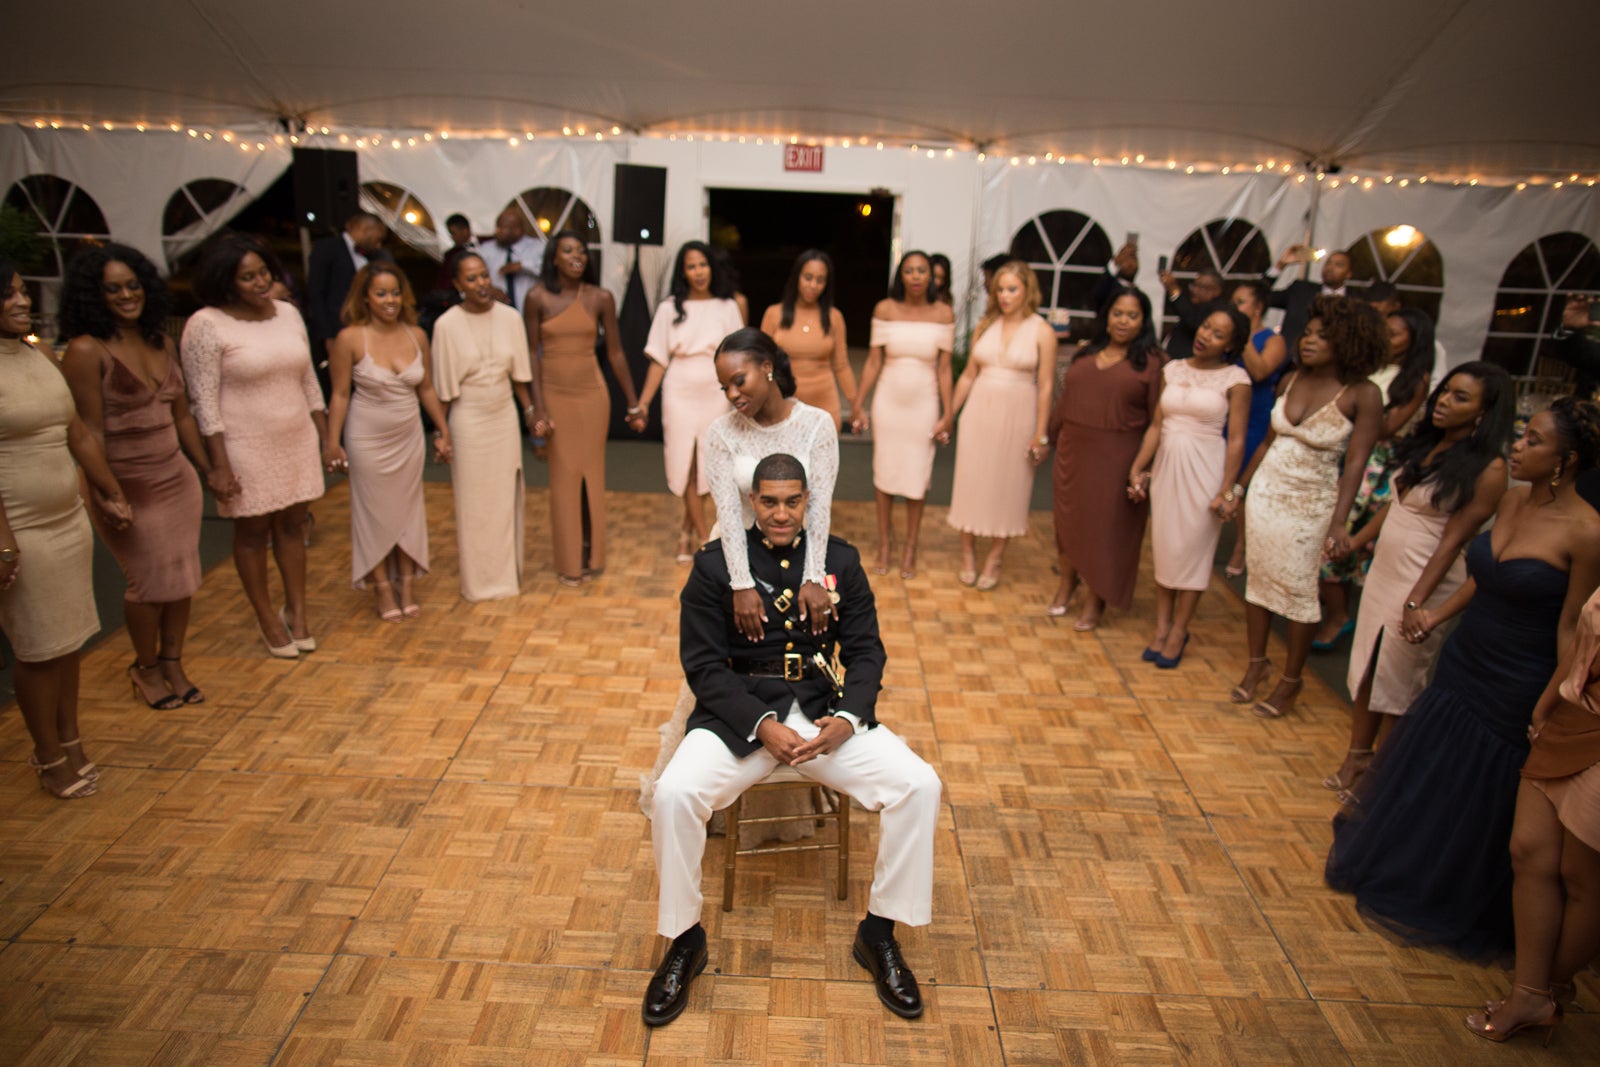 Bridal Bliss: Carlin and Madison’s Modern Military Wedding Photos Will Steal Your Heart